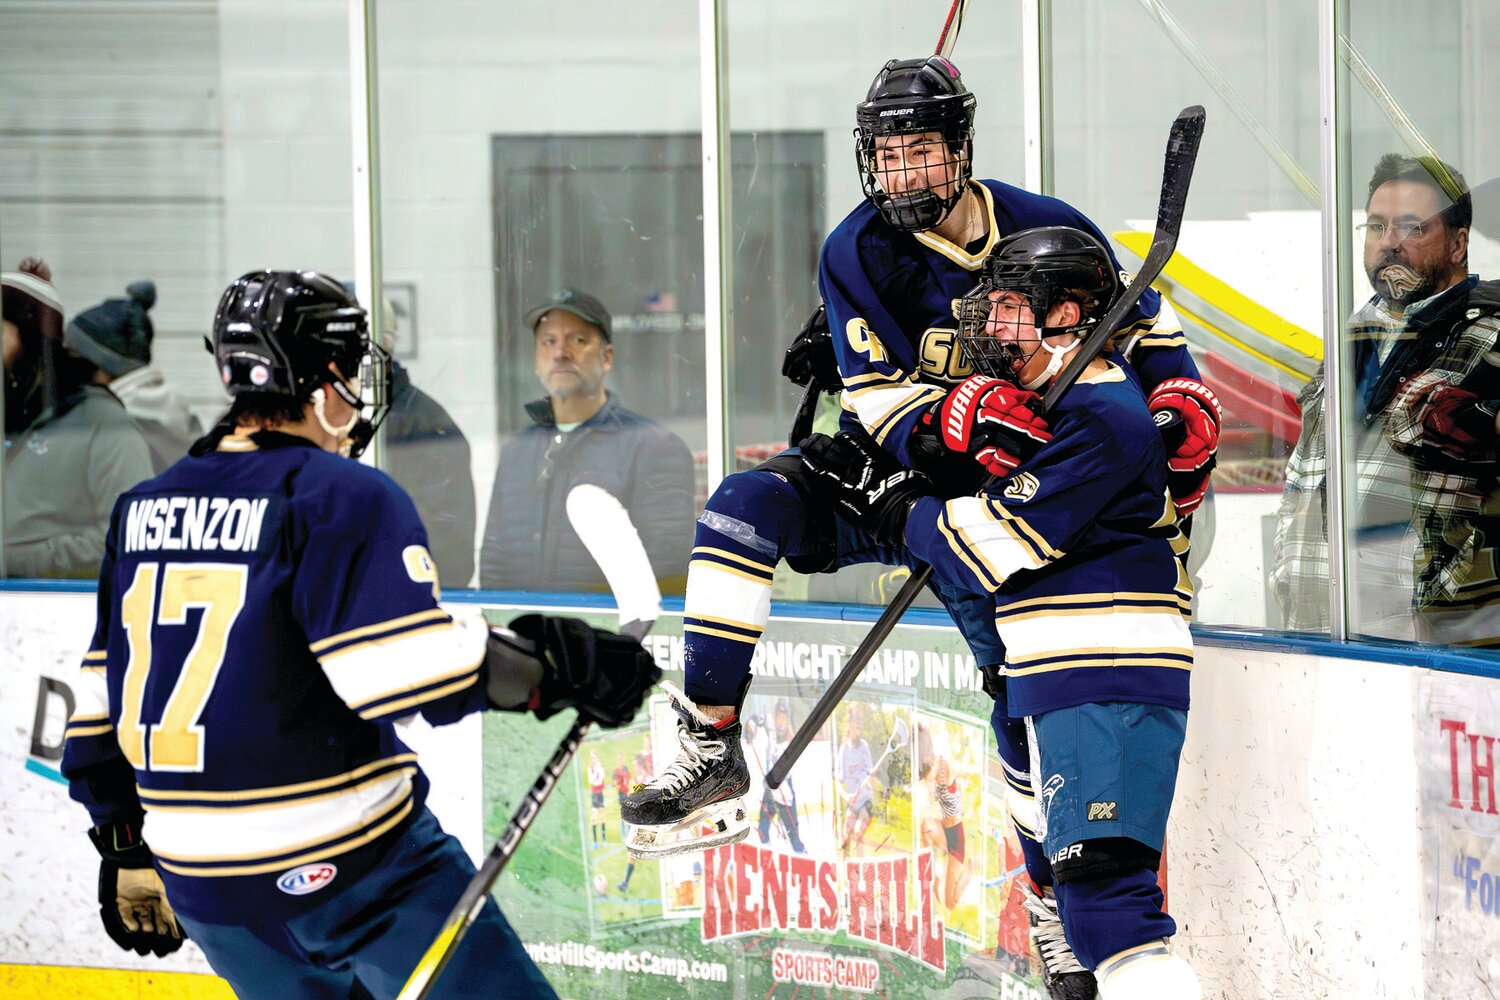 Council Rock South’s Jake Weiner celebrates his third goal of the game making it 6-2 in the third period. Weiner would score another tally late in the third for four goals total.